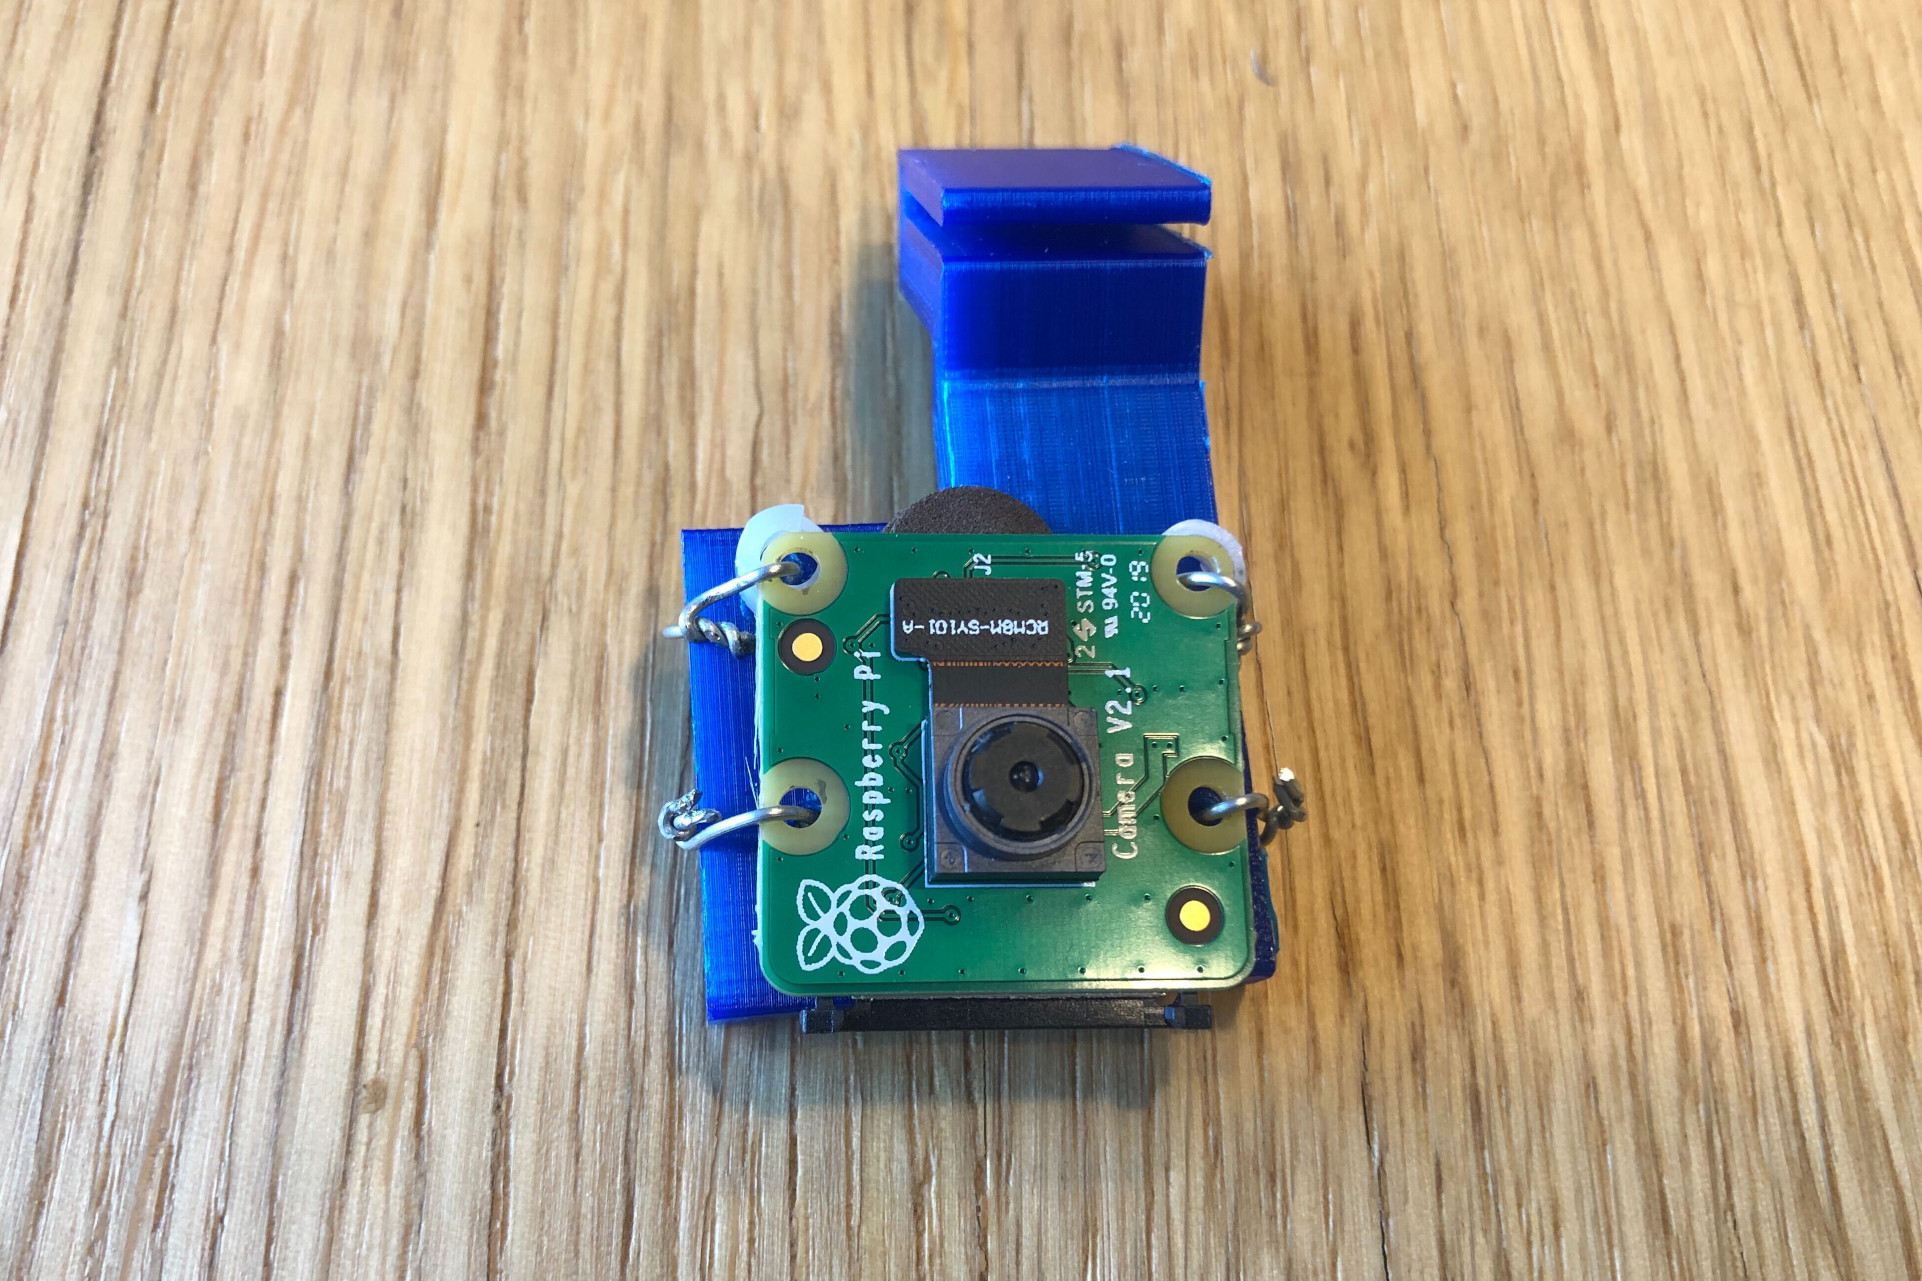 Camera on the 3d printed mount